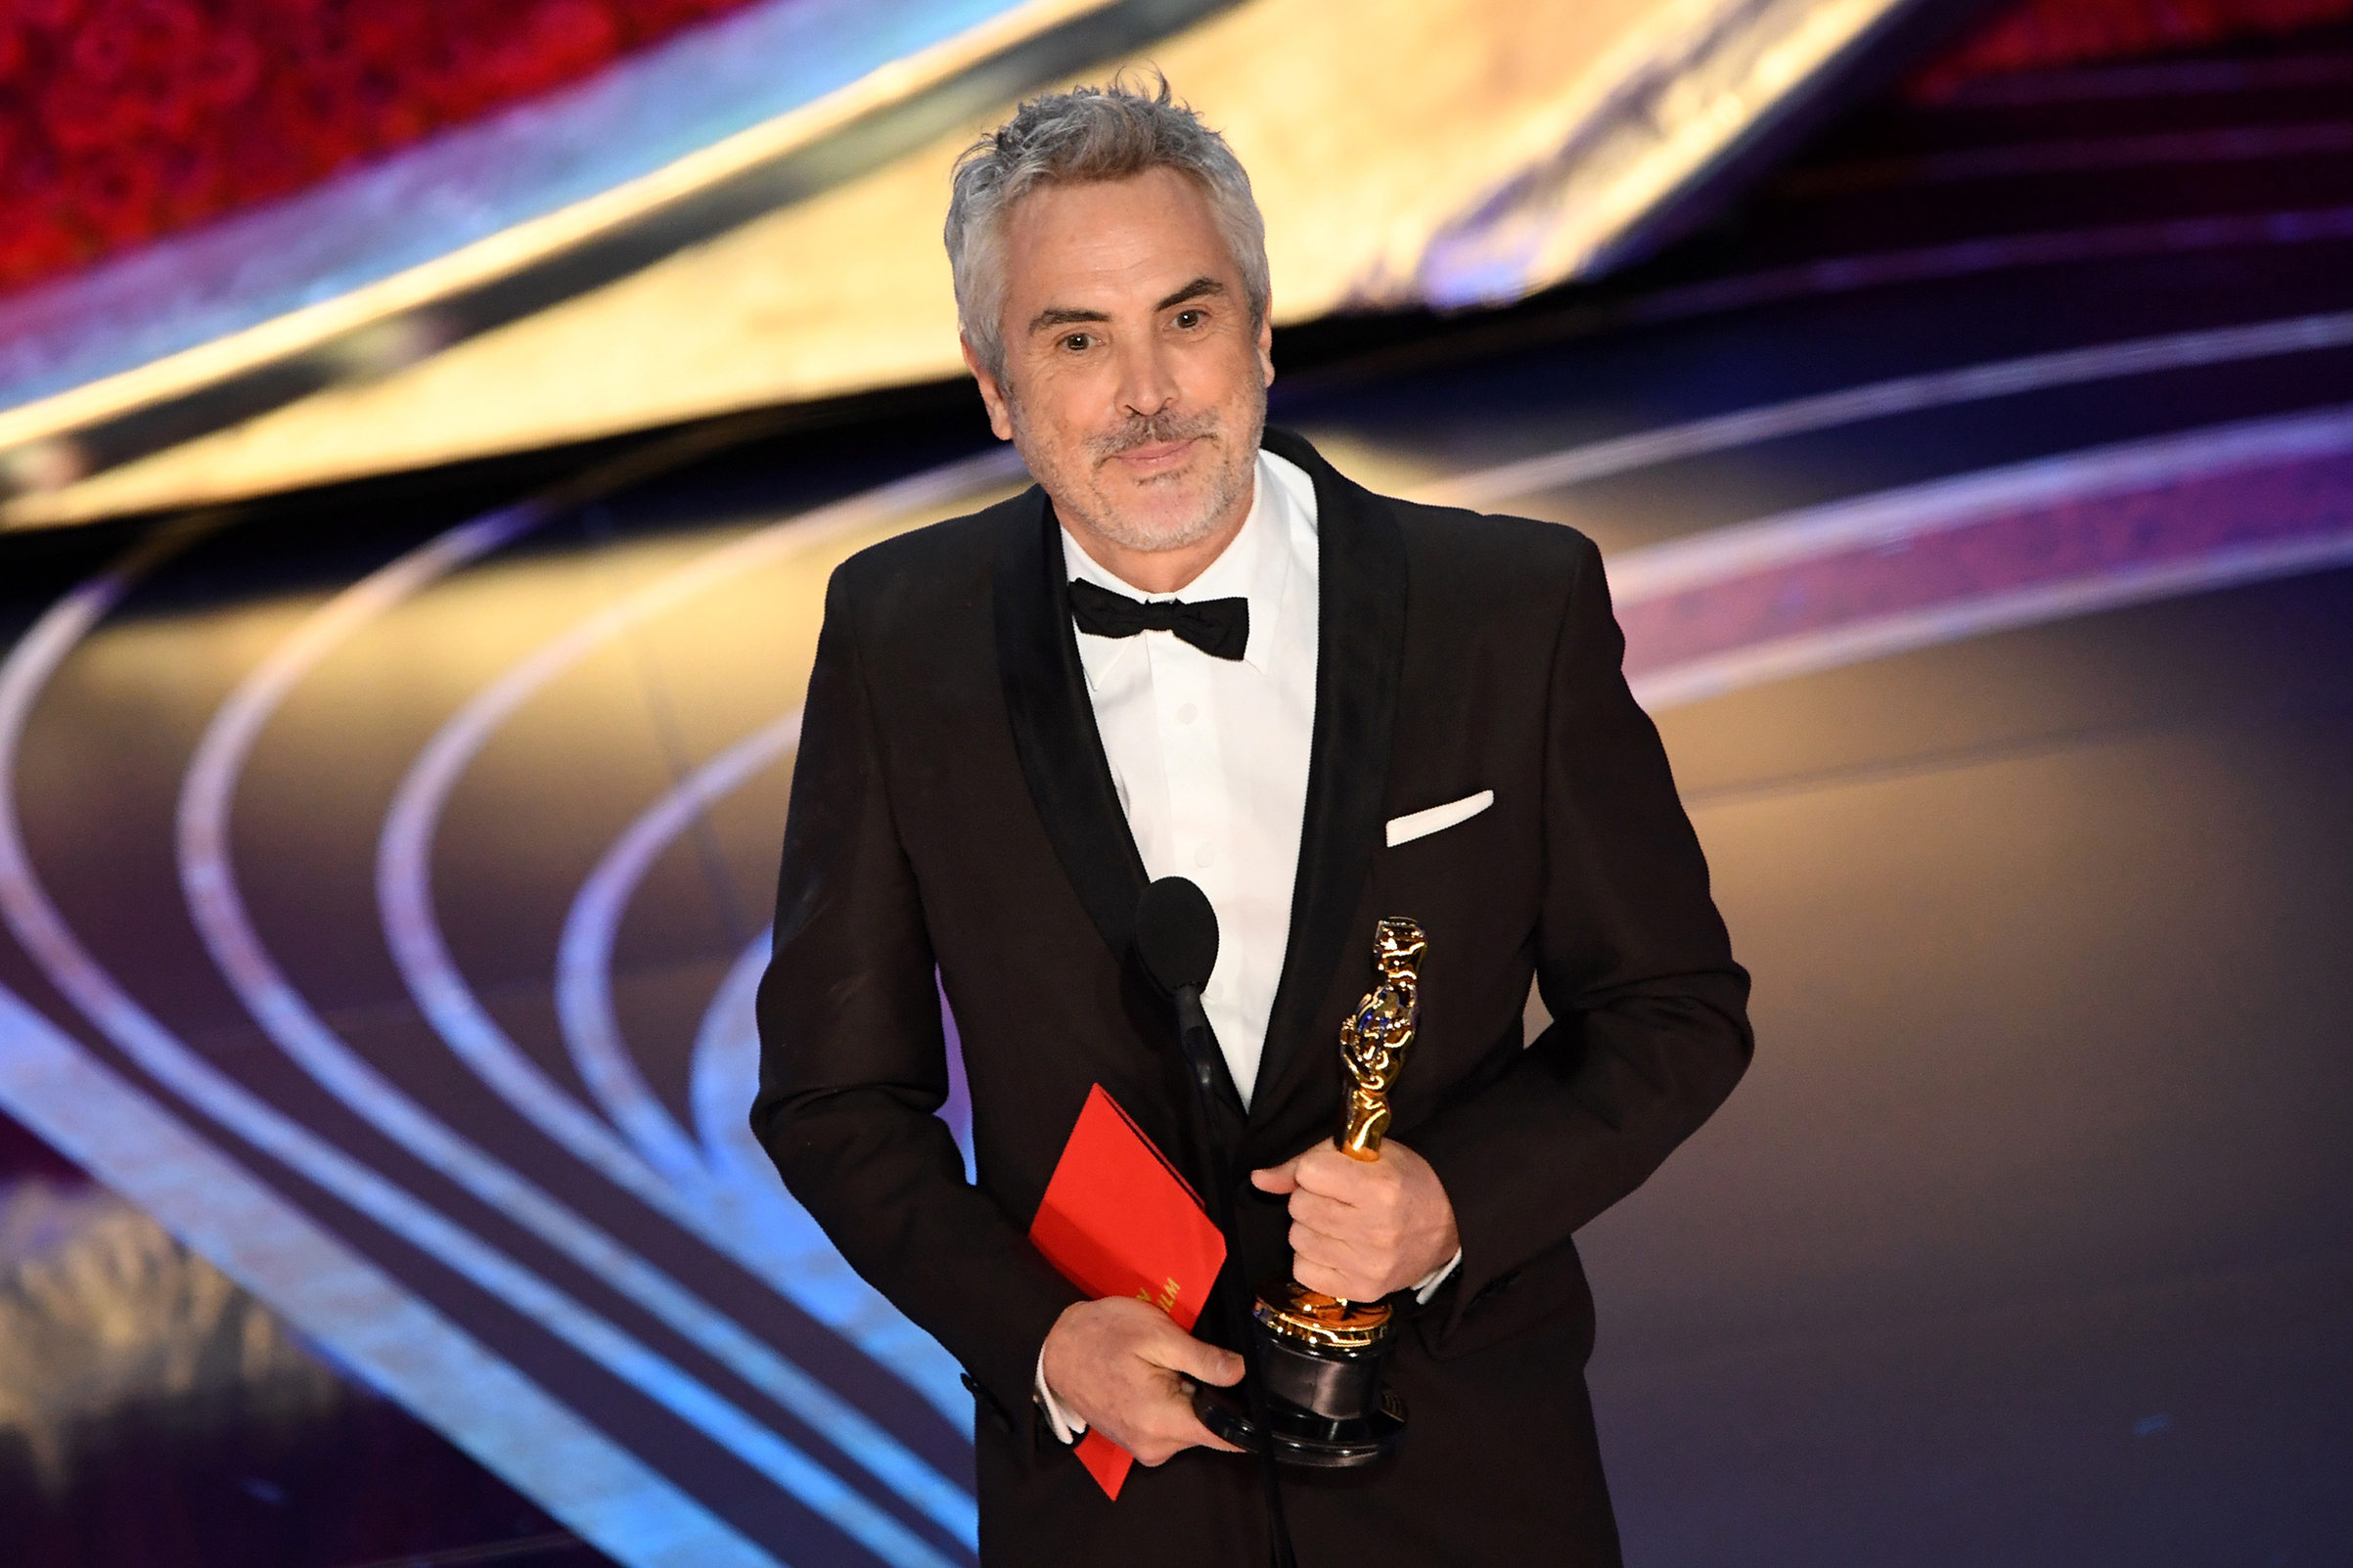 Best Foreign Language Film nominee for "Roma" Mexican director Alfonso Cuaron accepts the award for Best Foreign Language Film during the 91st Annual Academy Awards at the Dolby Theatre in Hollywood on Feb. 24, 2019. (Valerie Macon—AFP/Getty Images)